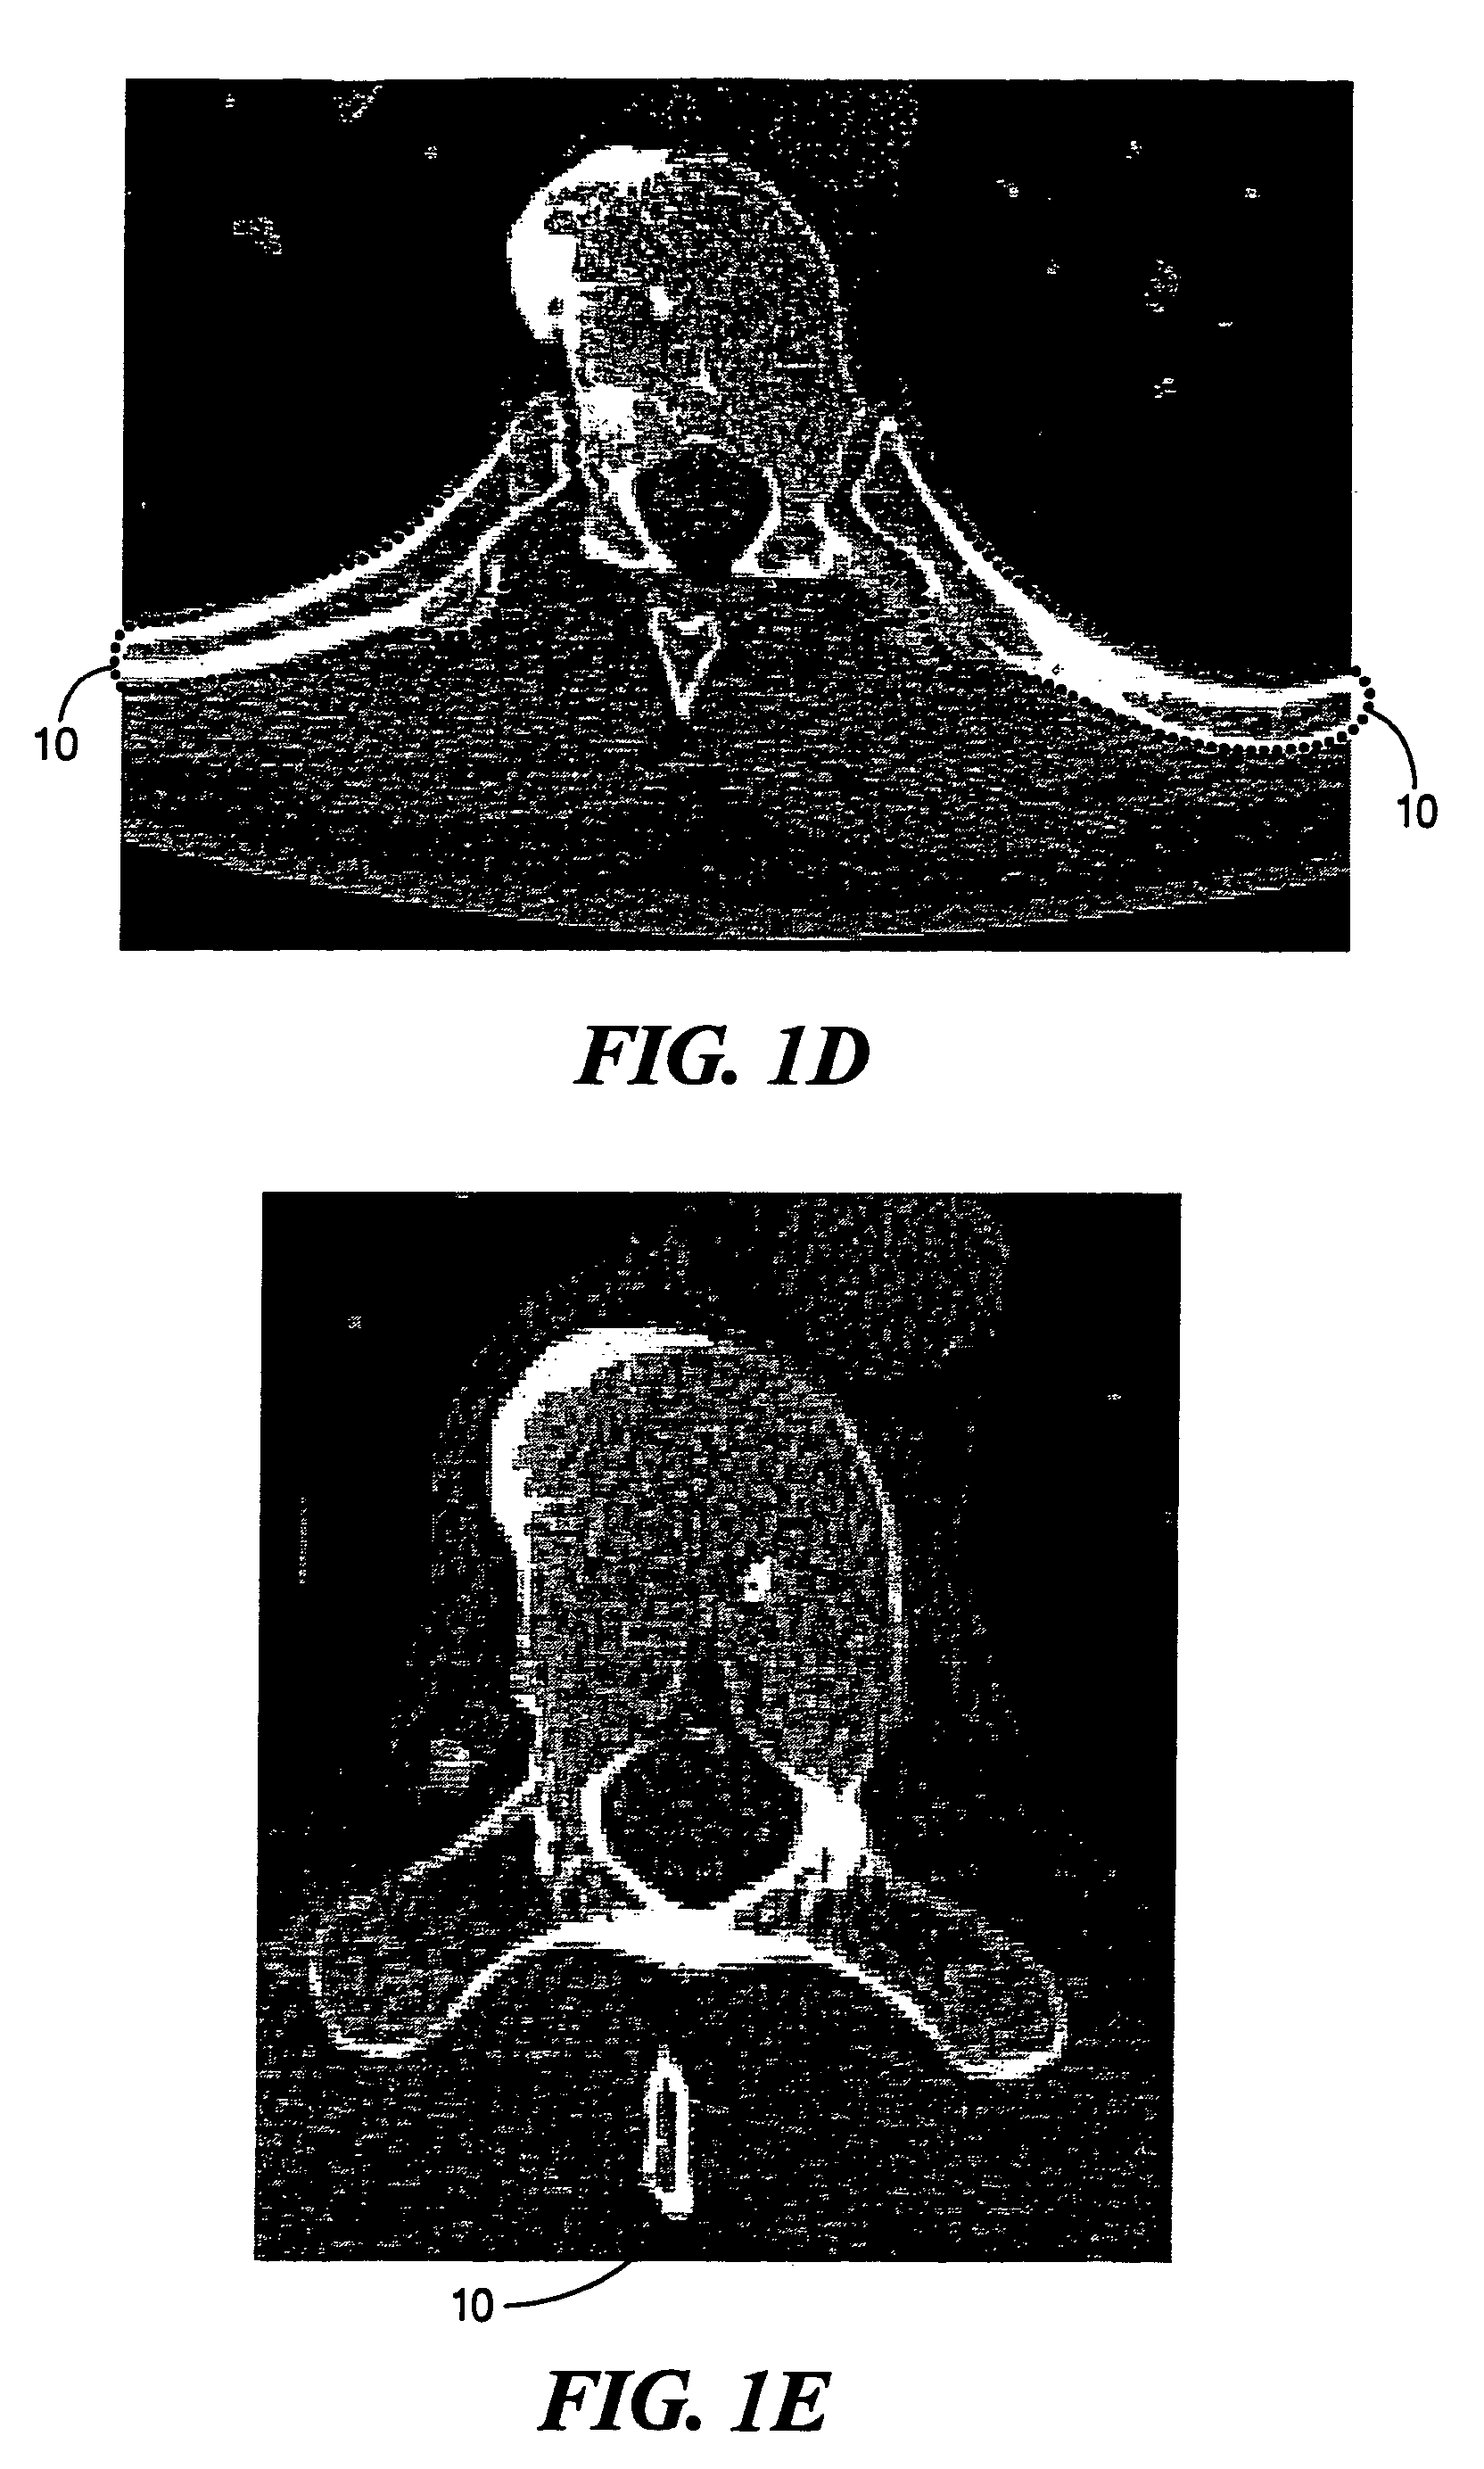 Method of incorporating prior knowledge in level set segmentation of 3D complex structures